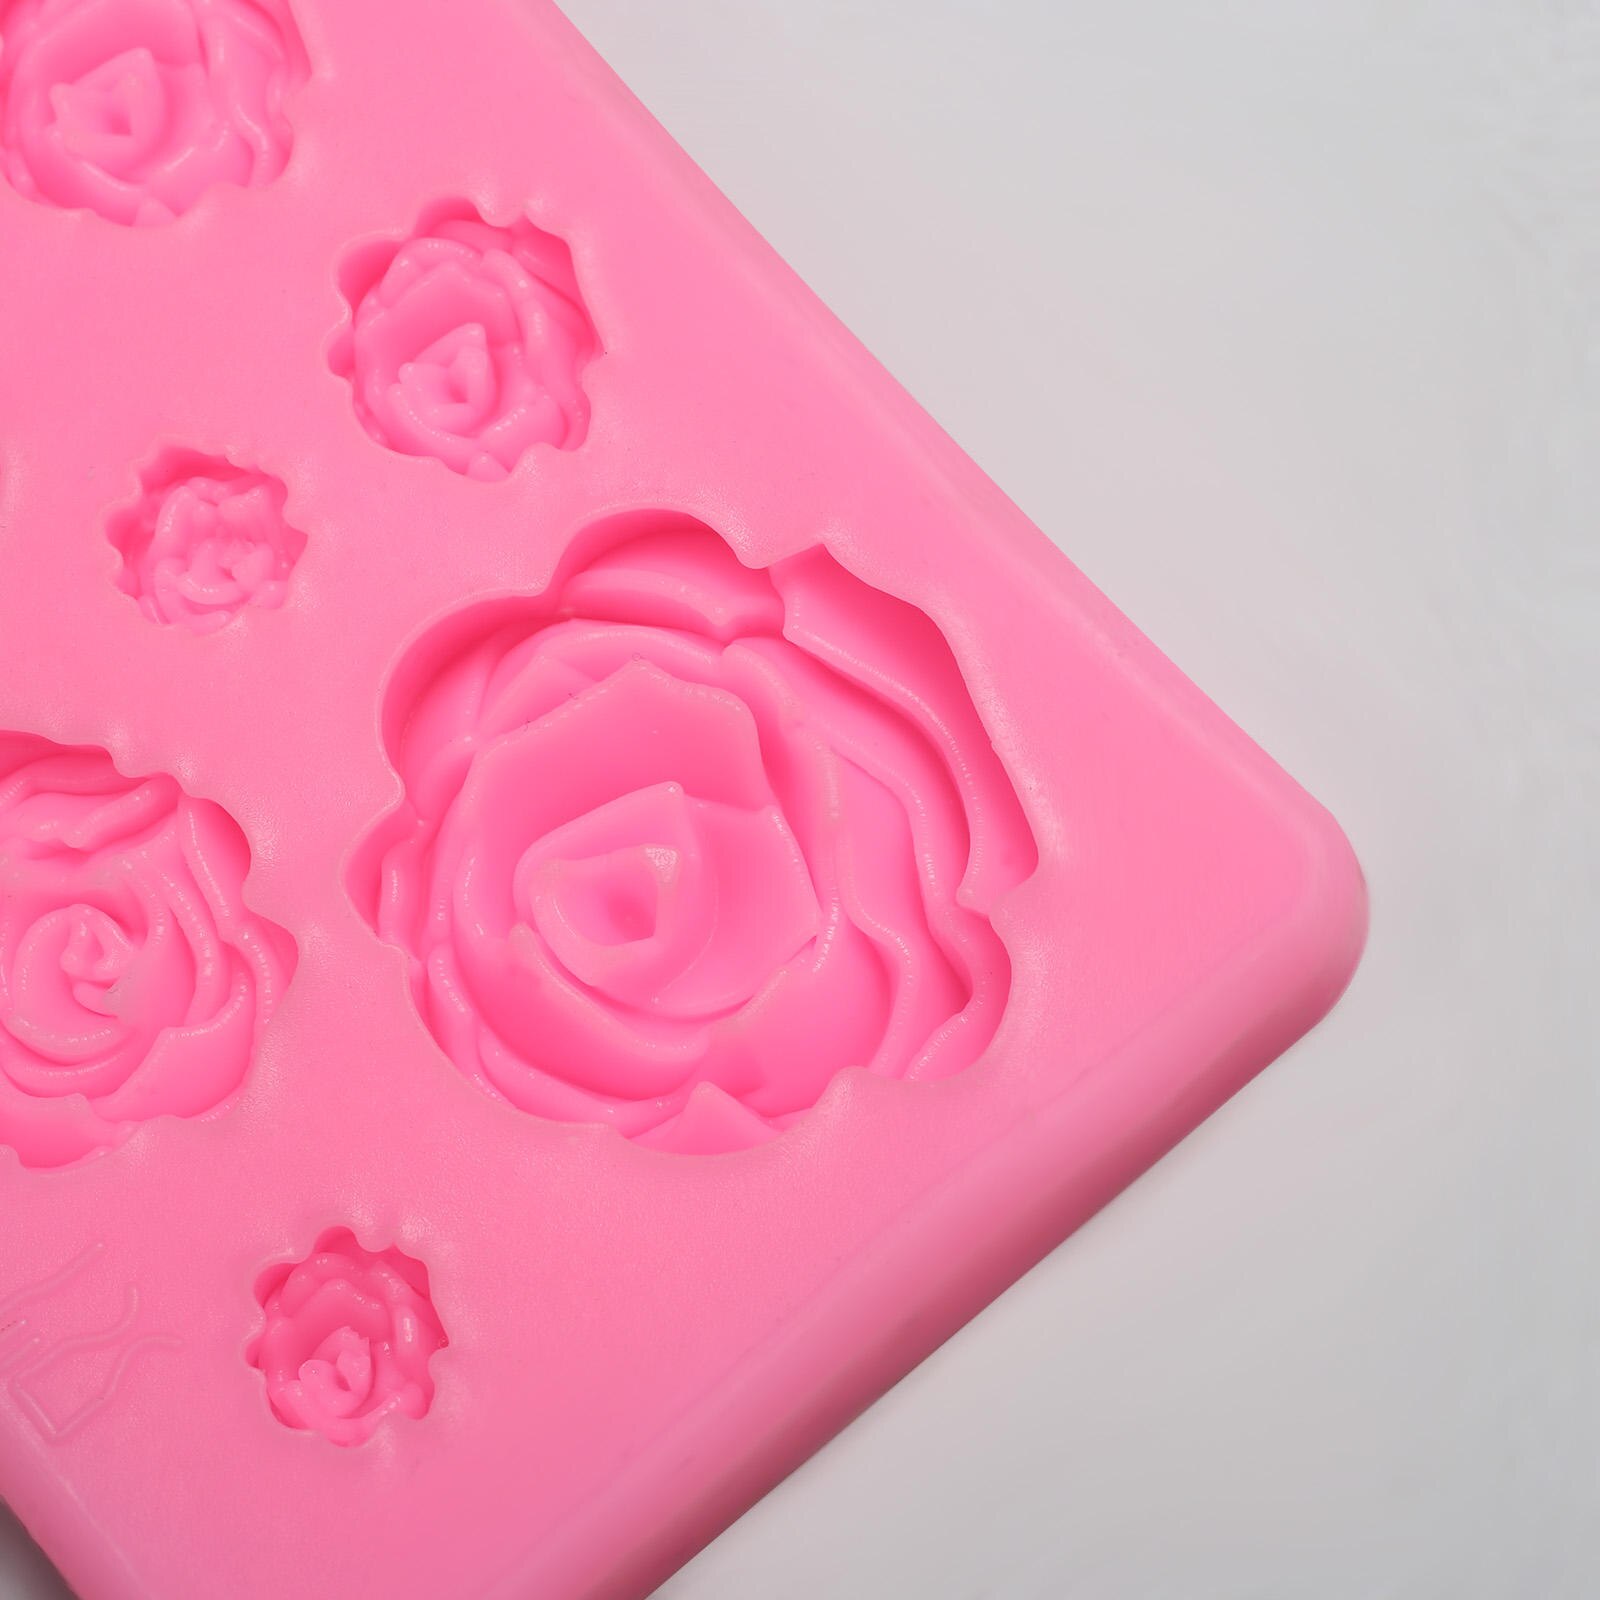 Rose Silicone Mold for Chocolate